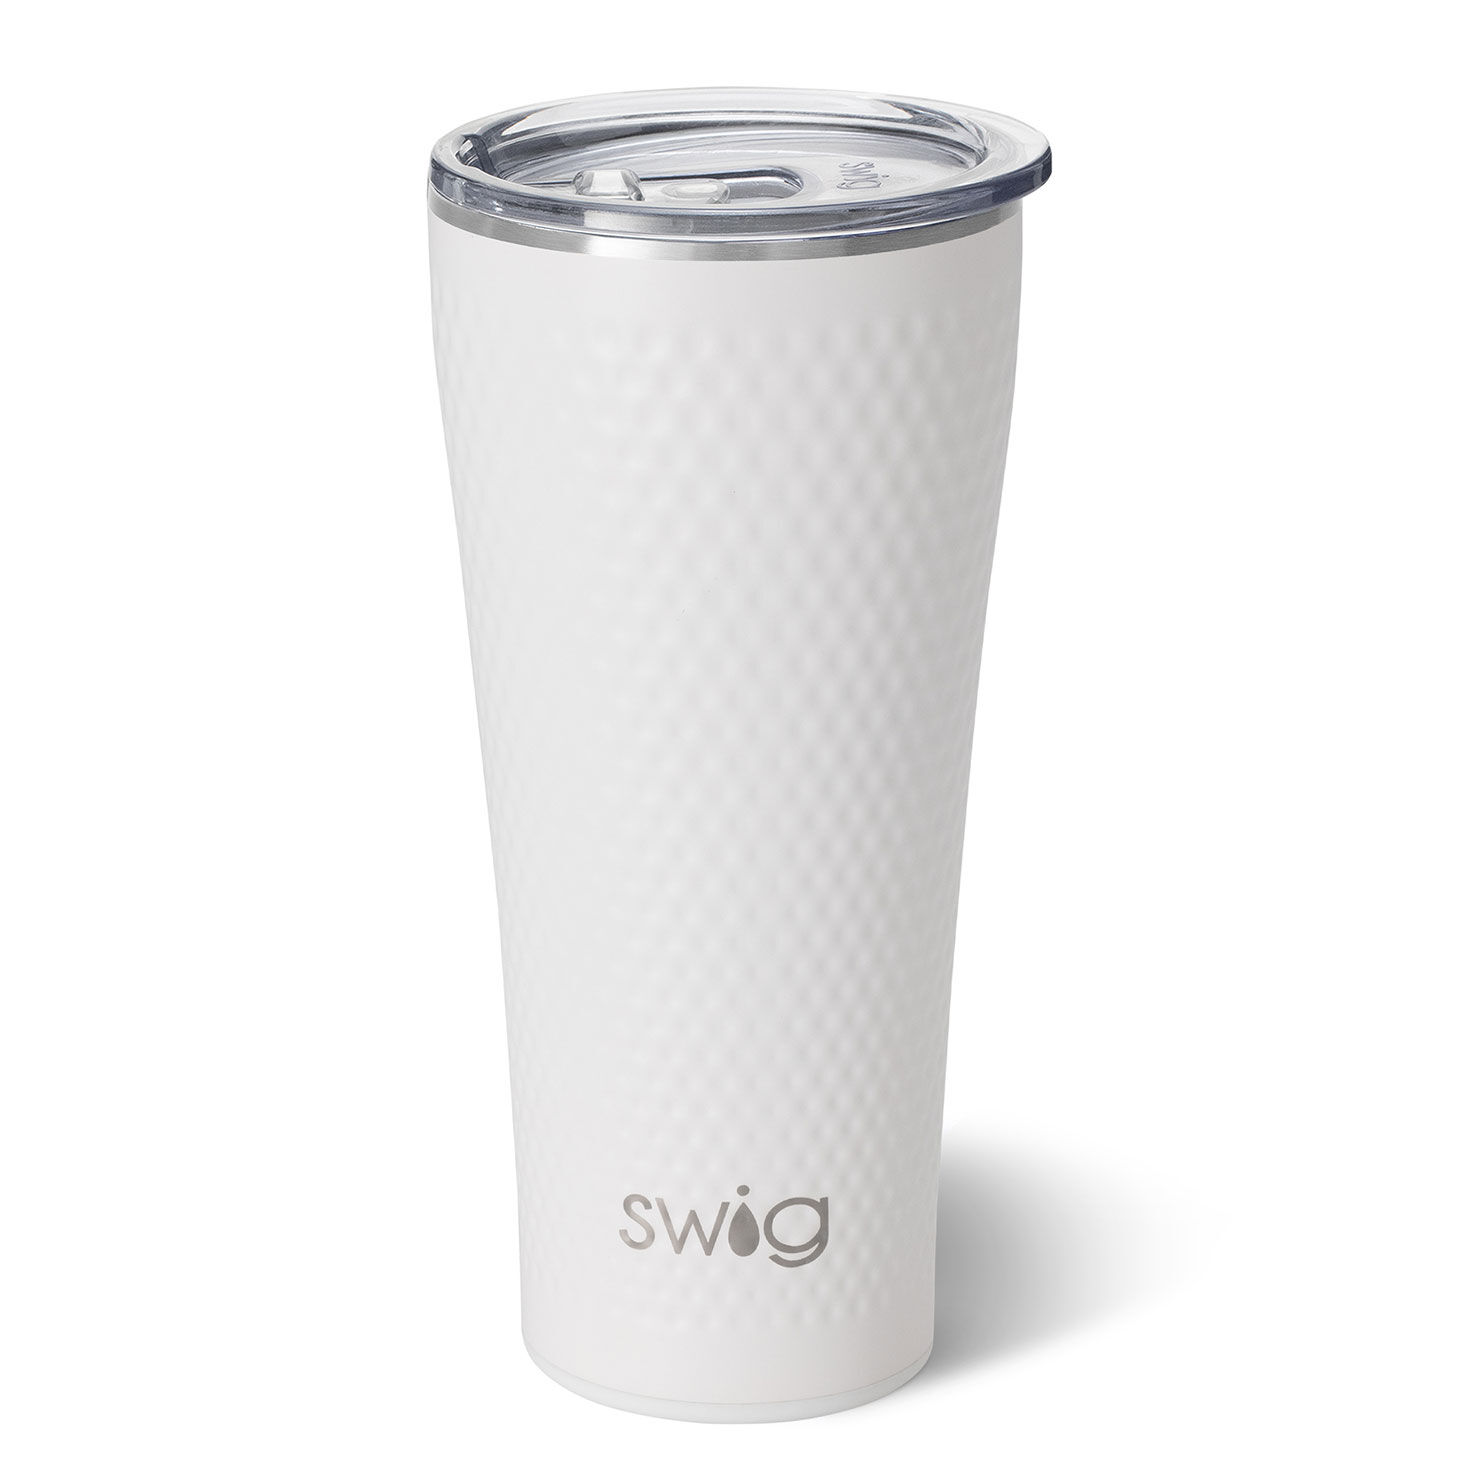 Swig Golf Partee Stainless Steel Tumbler, 32 oz. for only USD 42.99 | Hallmark